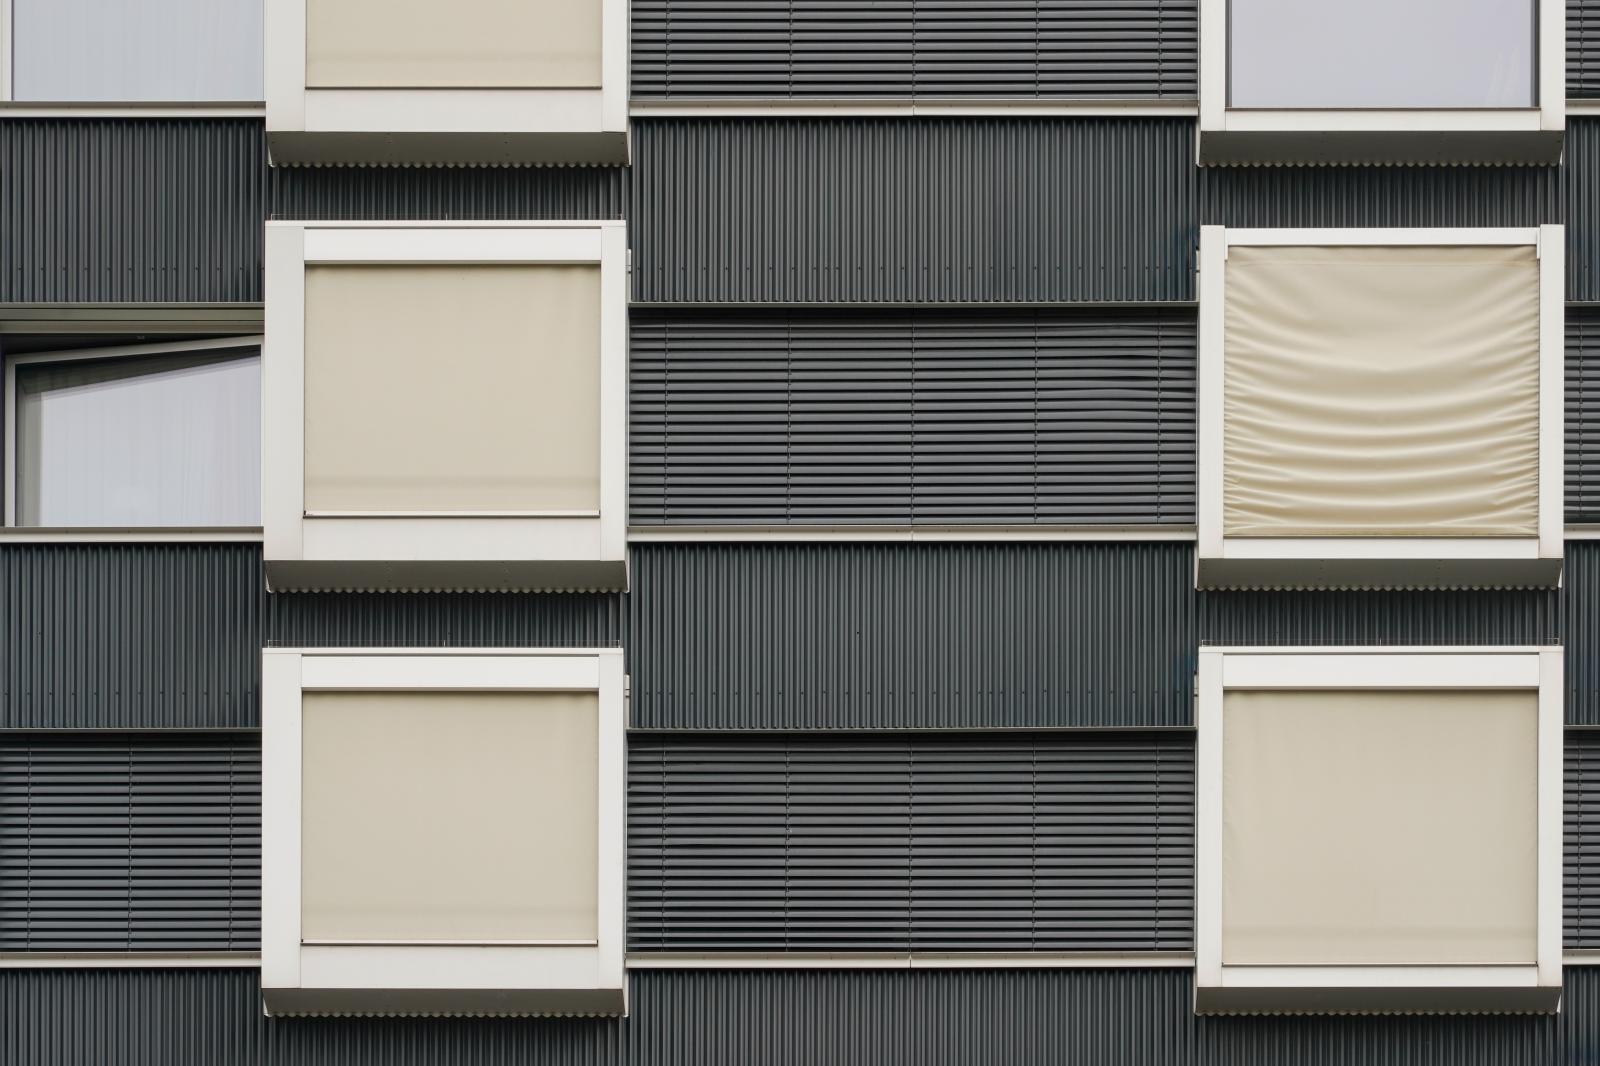 Image from Facades Architecture (3) <br /> Fascination of the Faces of Buildings -  Zürich, Switzerland  # 4249 3/2024 Rhythmic Pattern:...